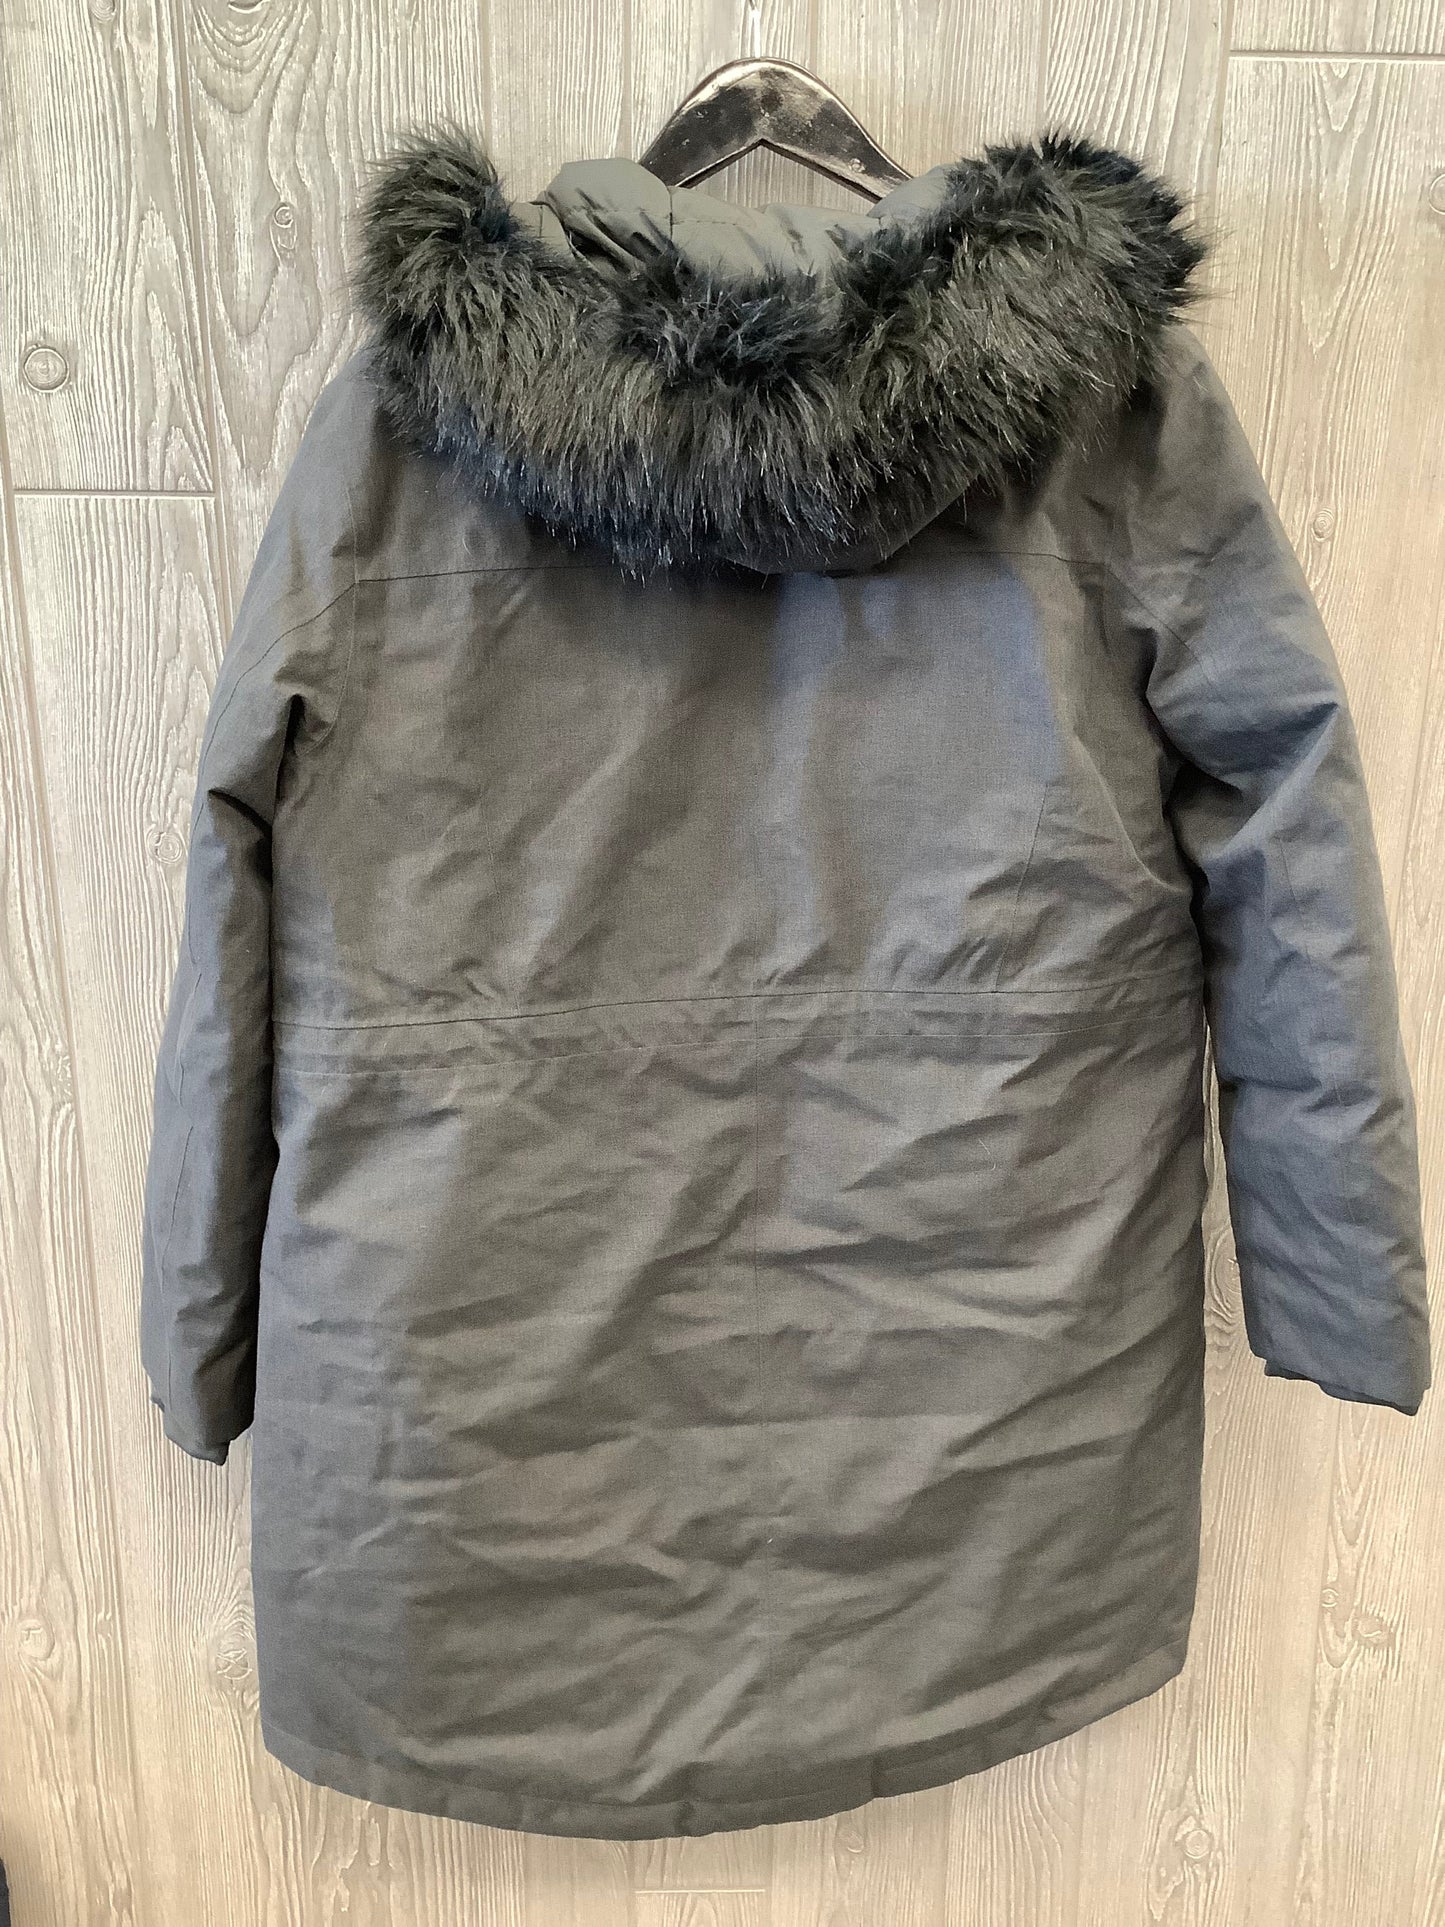 Coat Puffer & Quilted By The North Face  Size: L